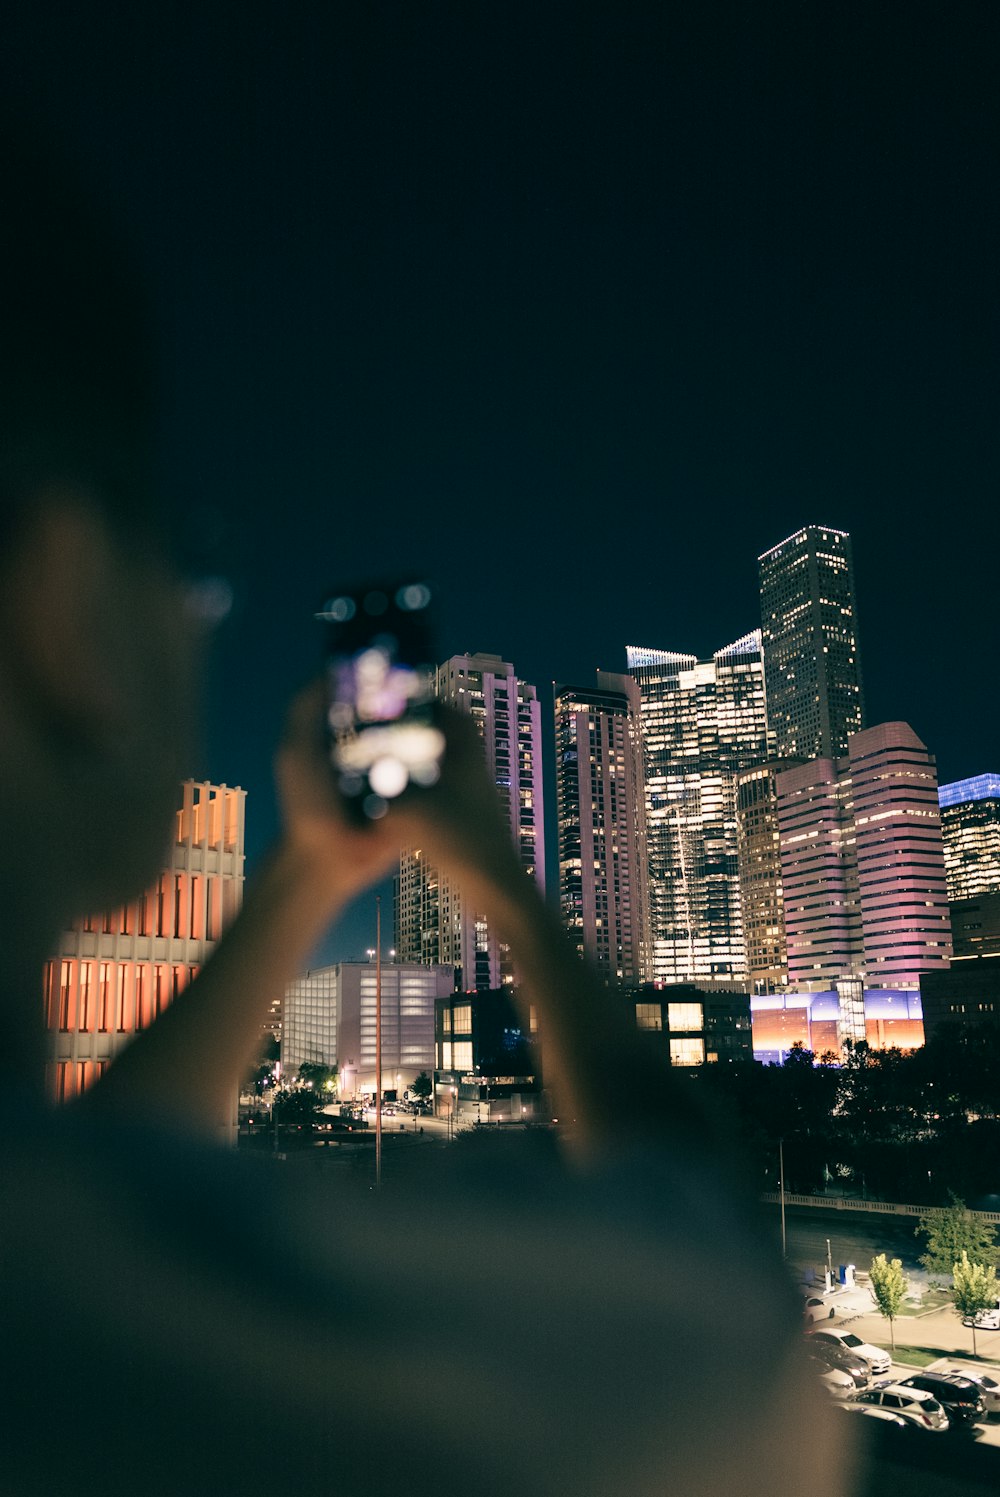 a man taking a picture of a city at night